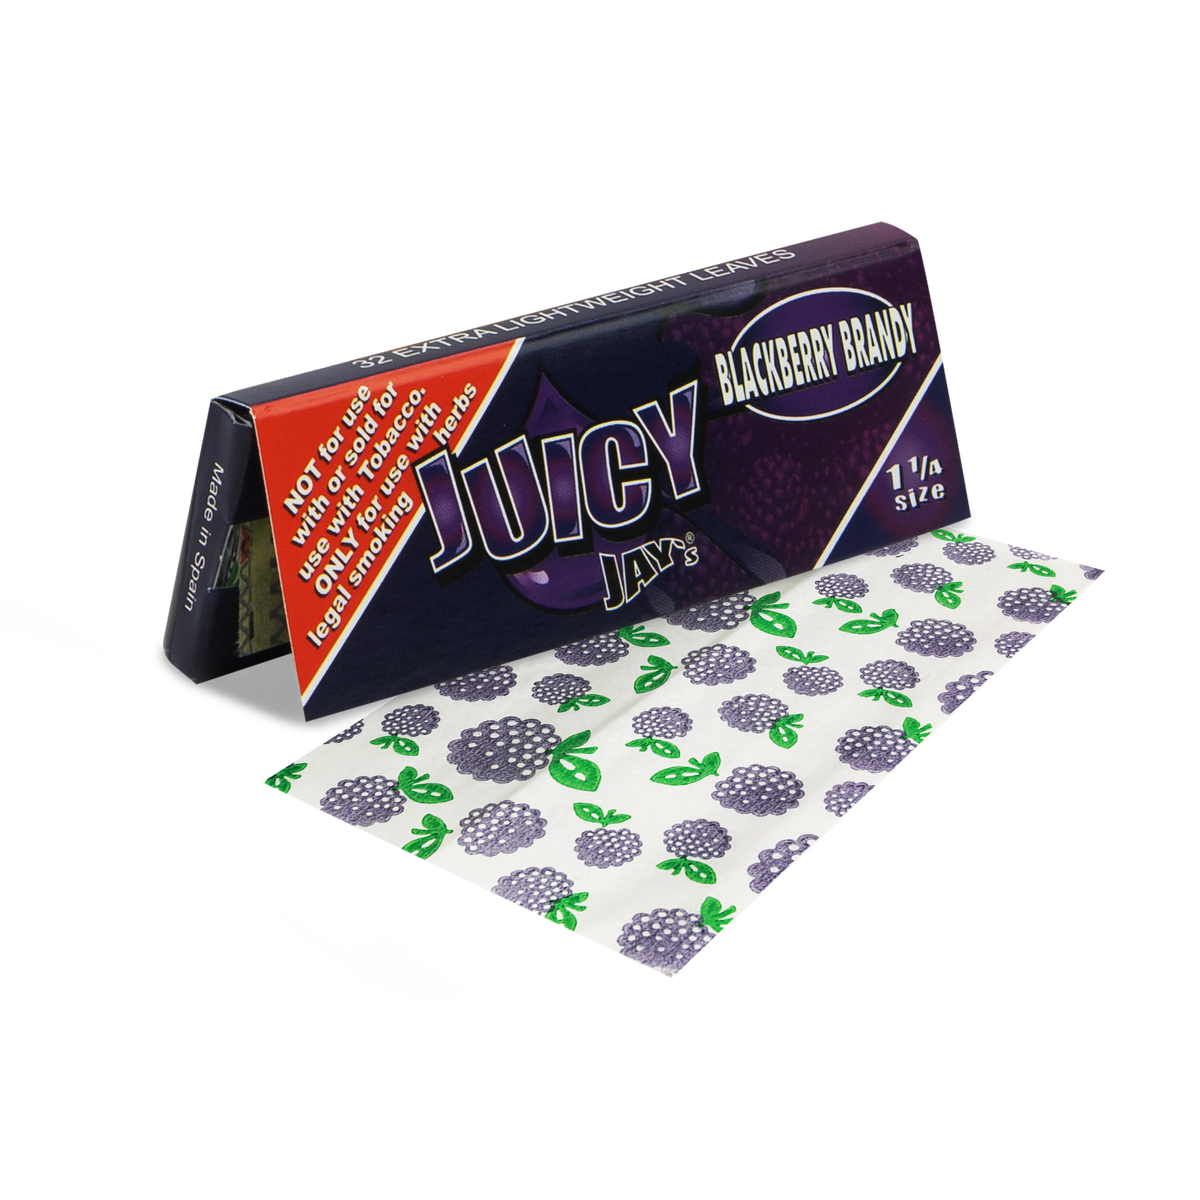 Juicy Jays 1 1/4 Blackberry Brandy Flavored Hemp Rolling Papers Rolling Papers esd-official